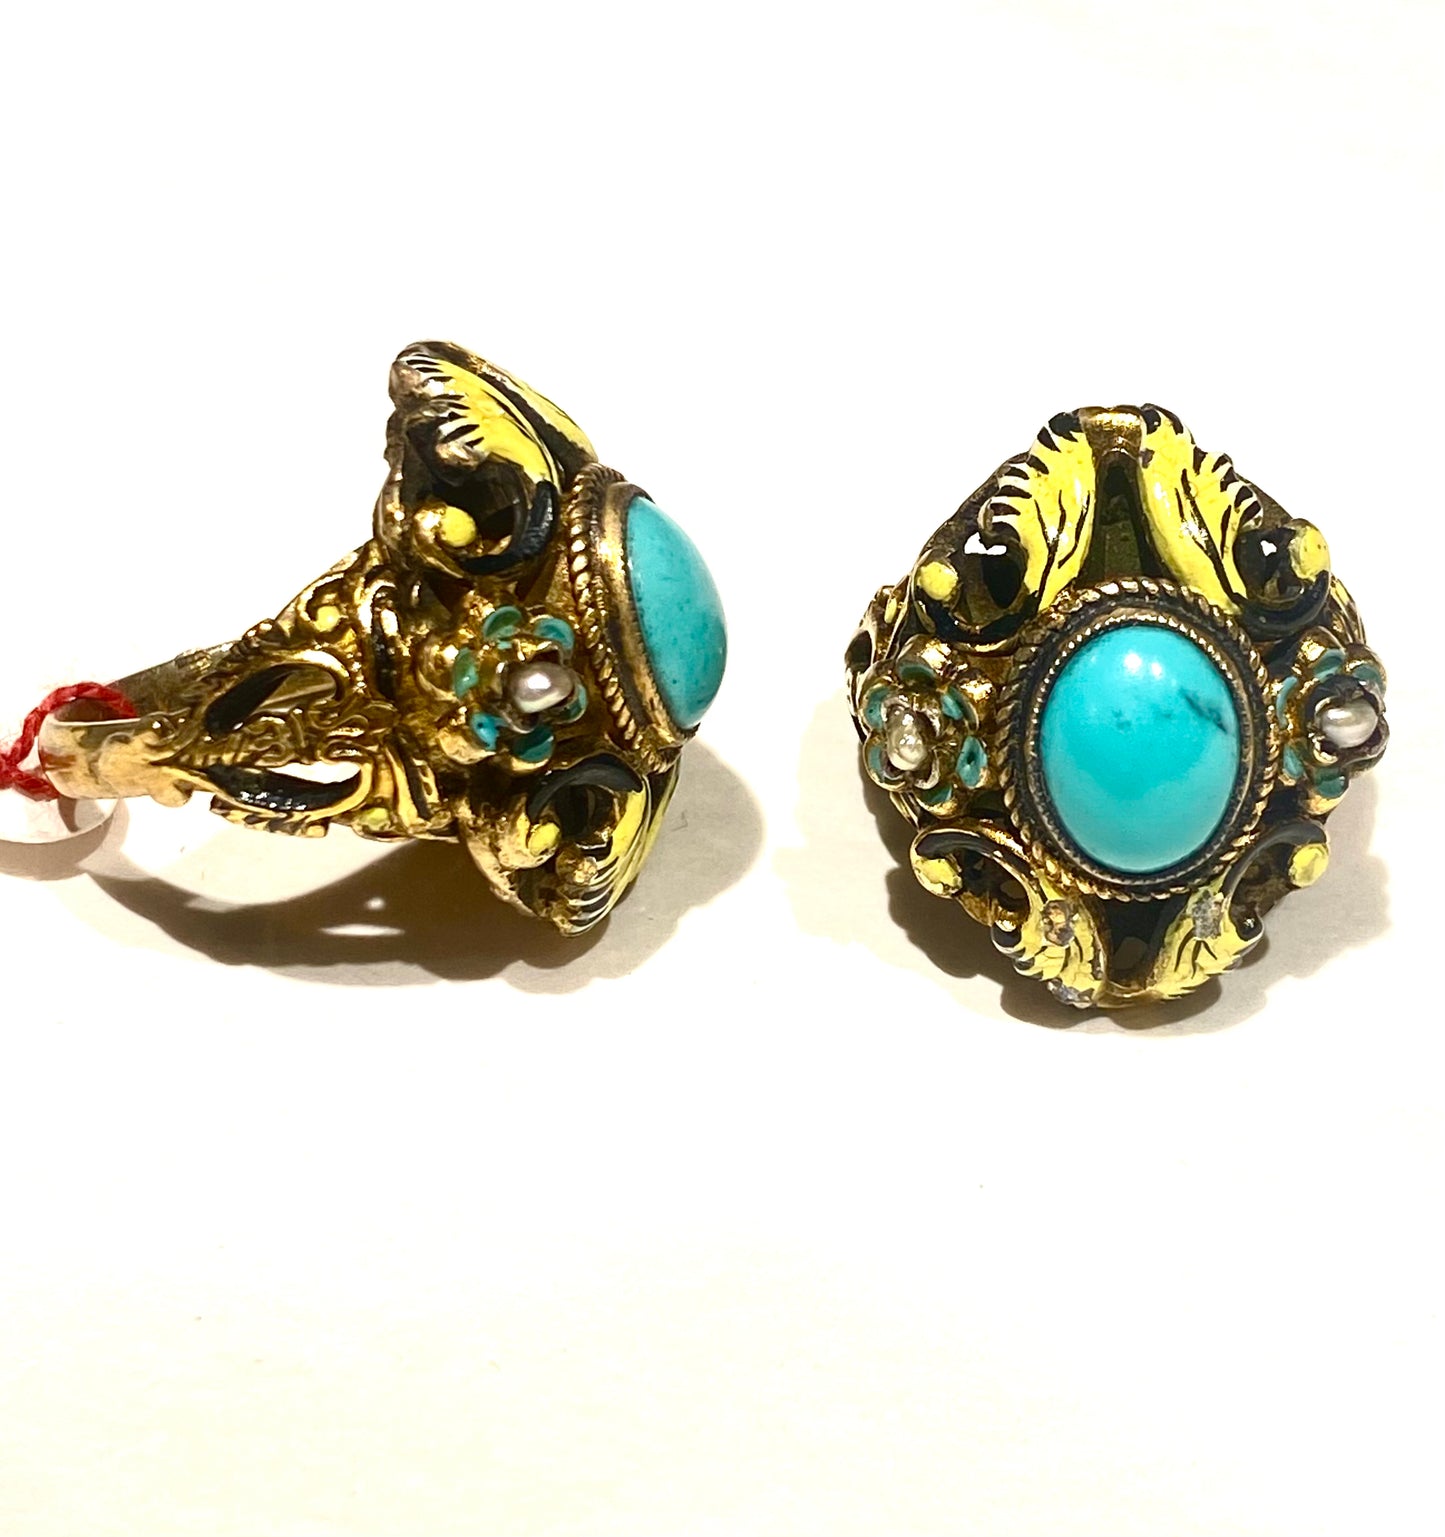 Fabergè style gold plated 900 silver ring with turquoise stone